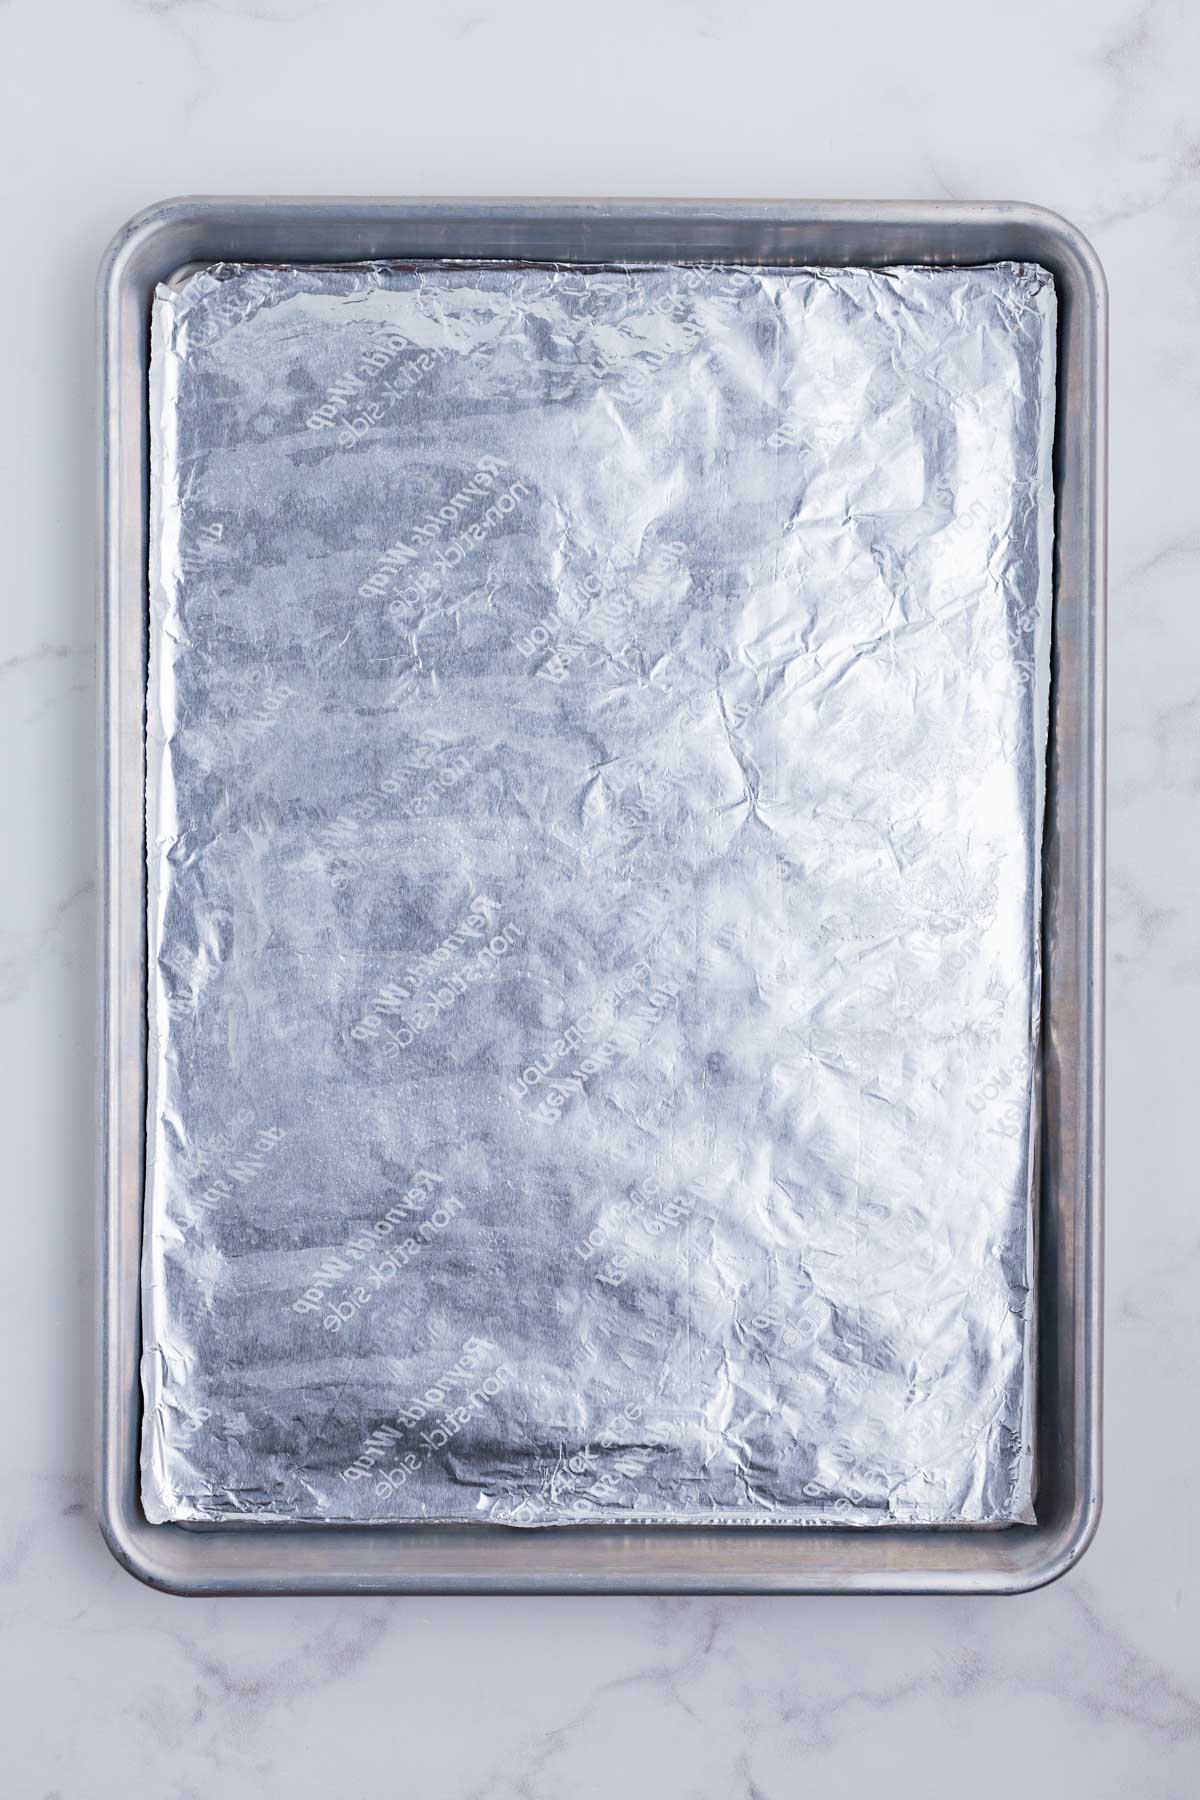 A baking sheet is lined with foil.